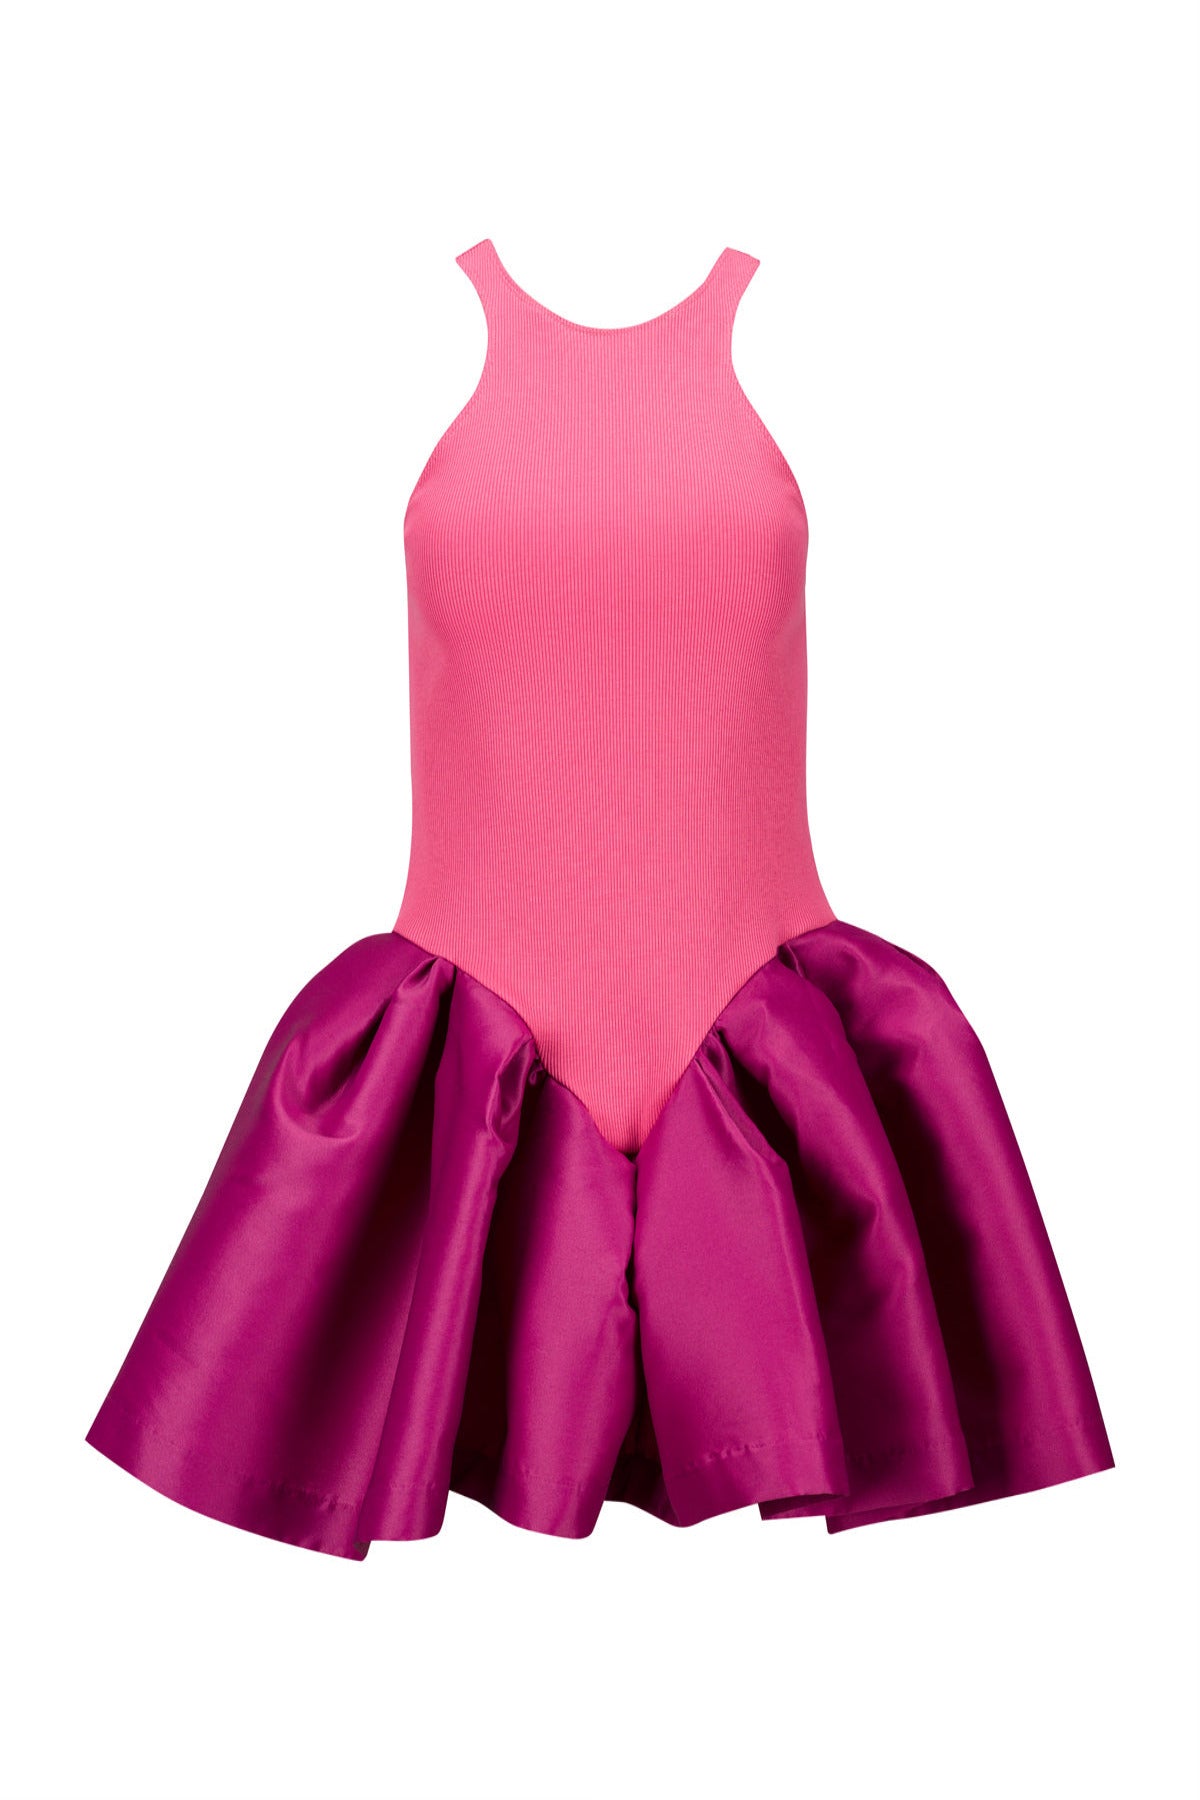 PINK TANK TOP WITH PEPLUM marques almeida